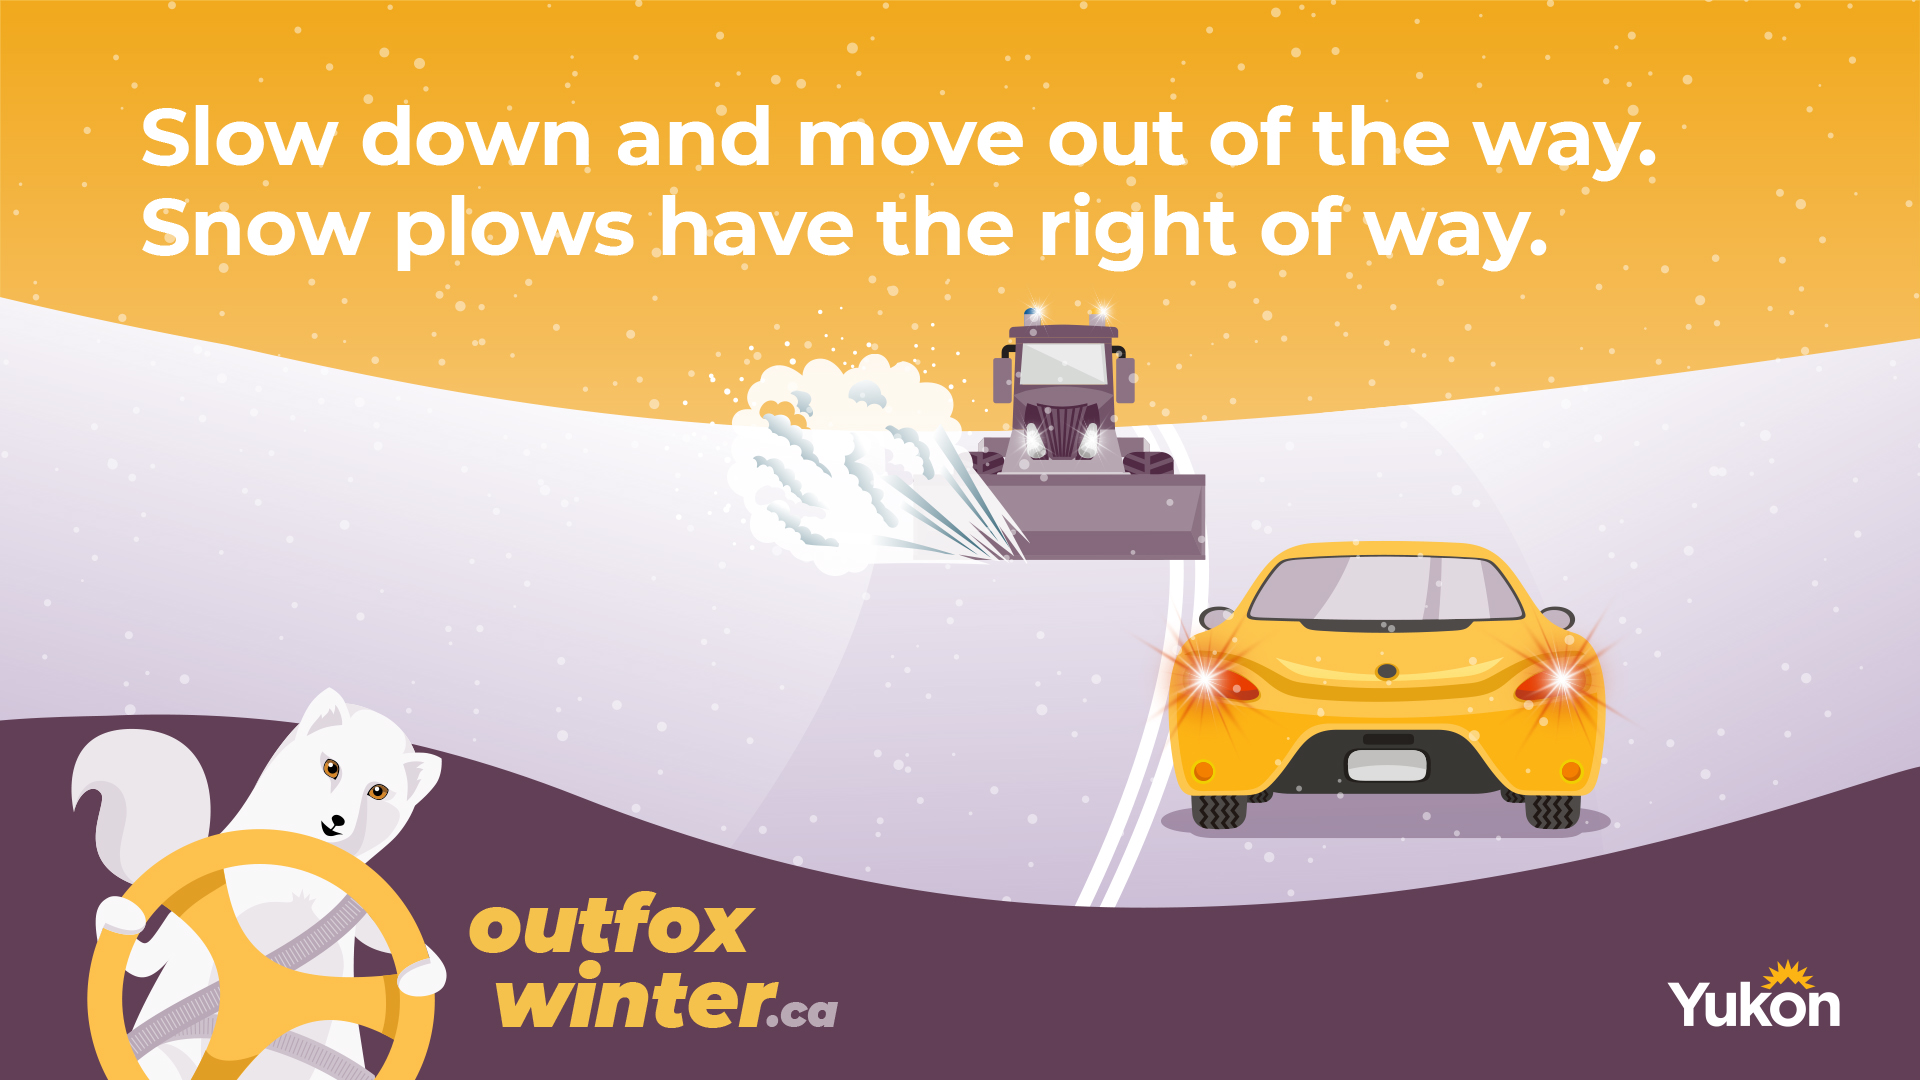 A yellow car slowing down and moving out of a snow plow's path.